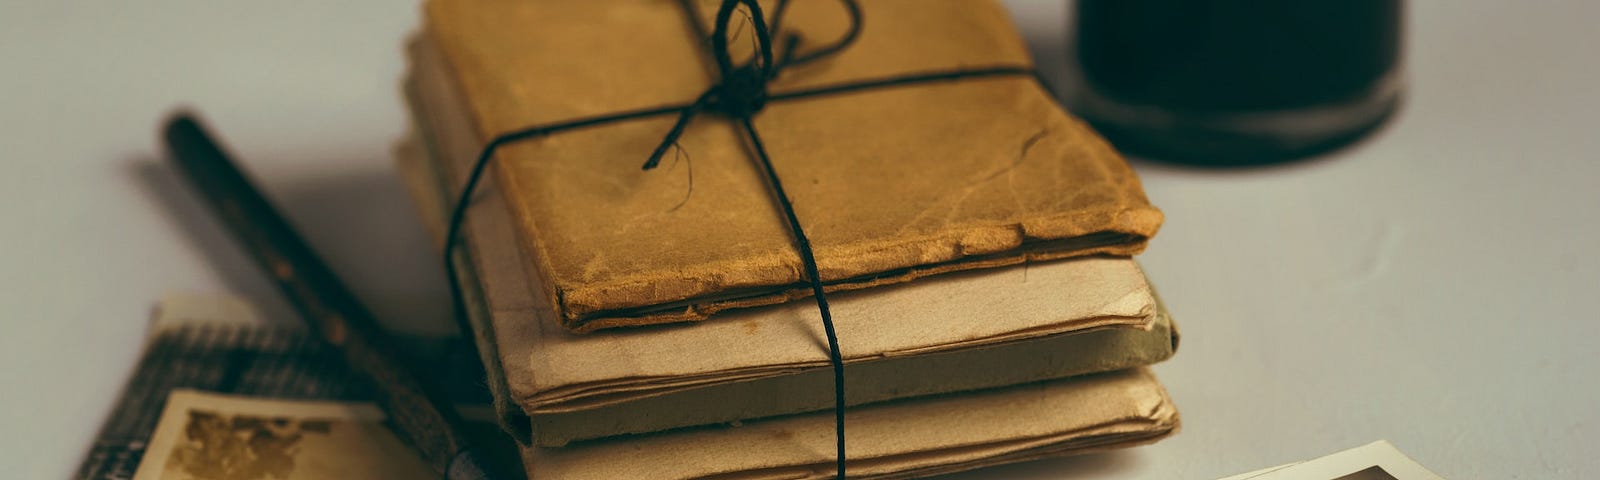 Stack of old letters tied in a bundle by a caligraphy pen and sepia-tone photos. Photo by Joanna Kosinska, Unsplash.